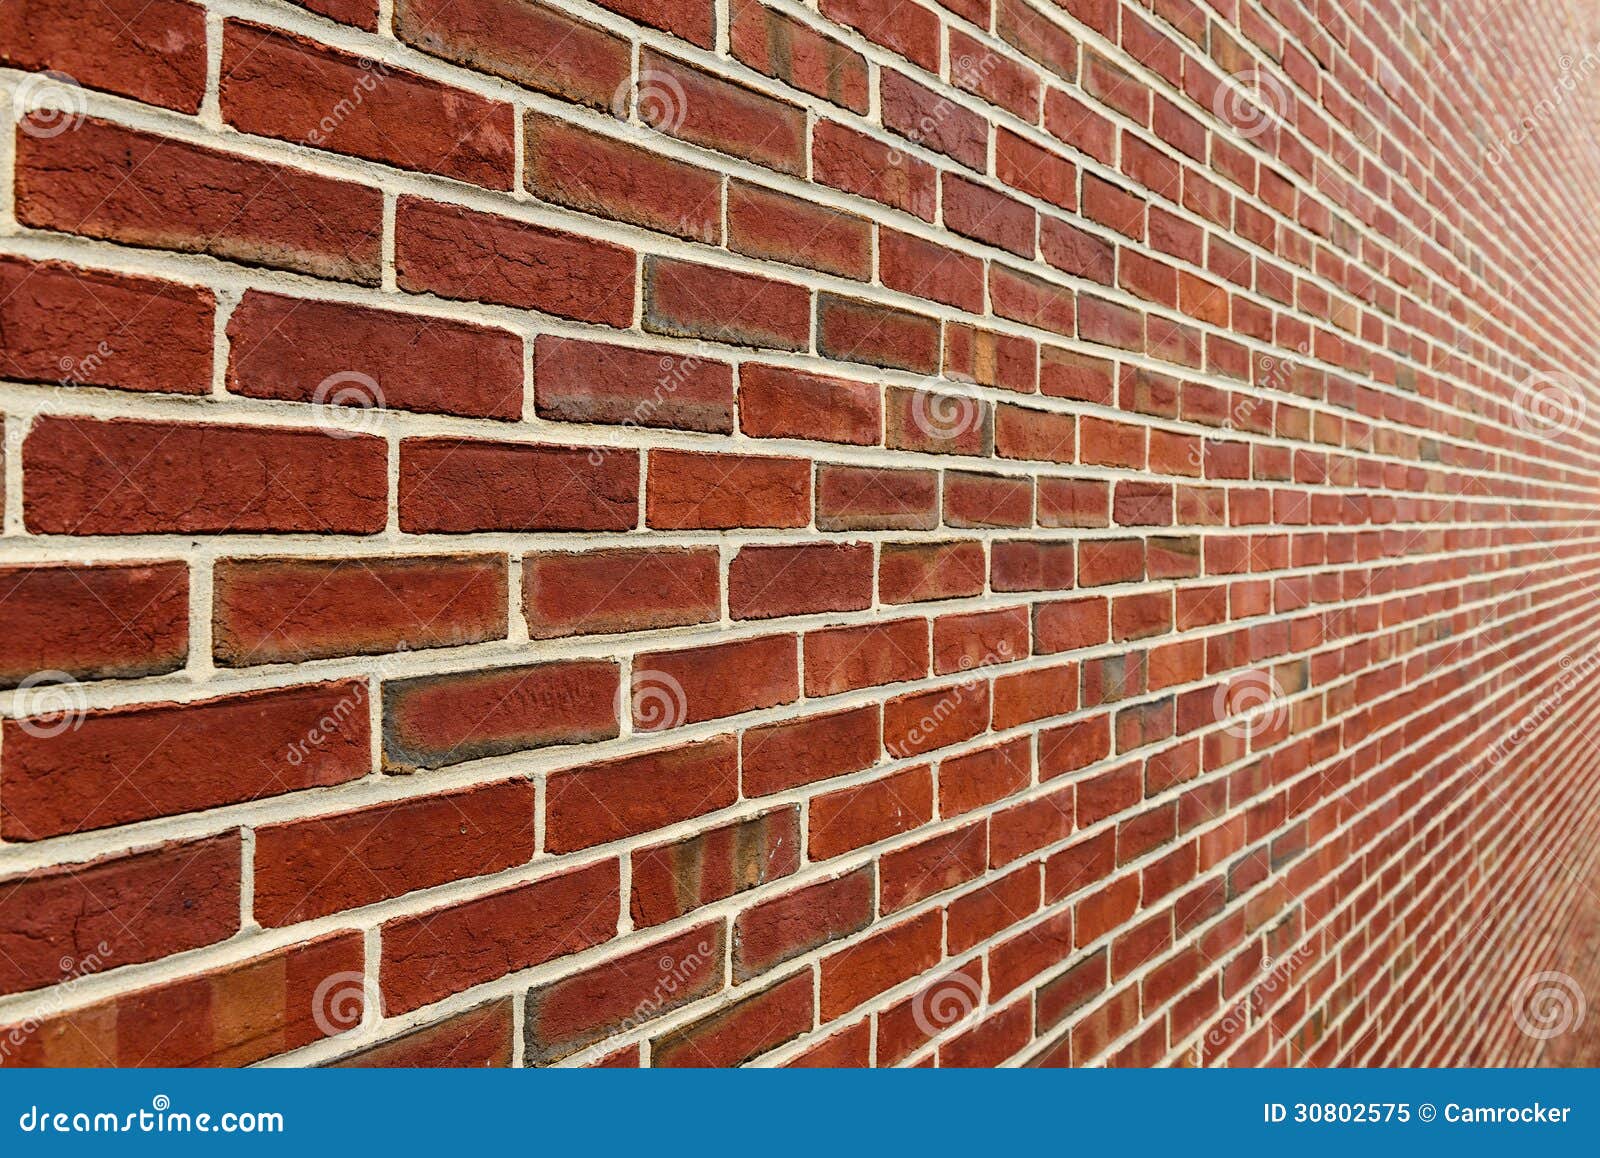 brick wall with diminishing perspective